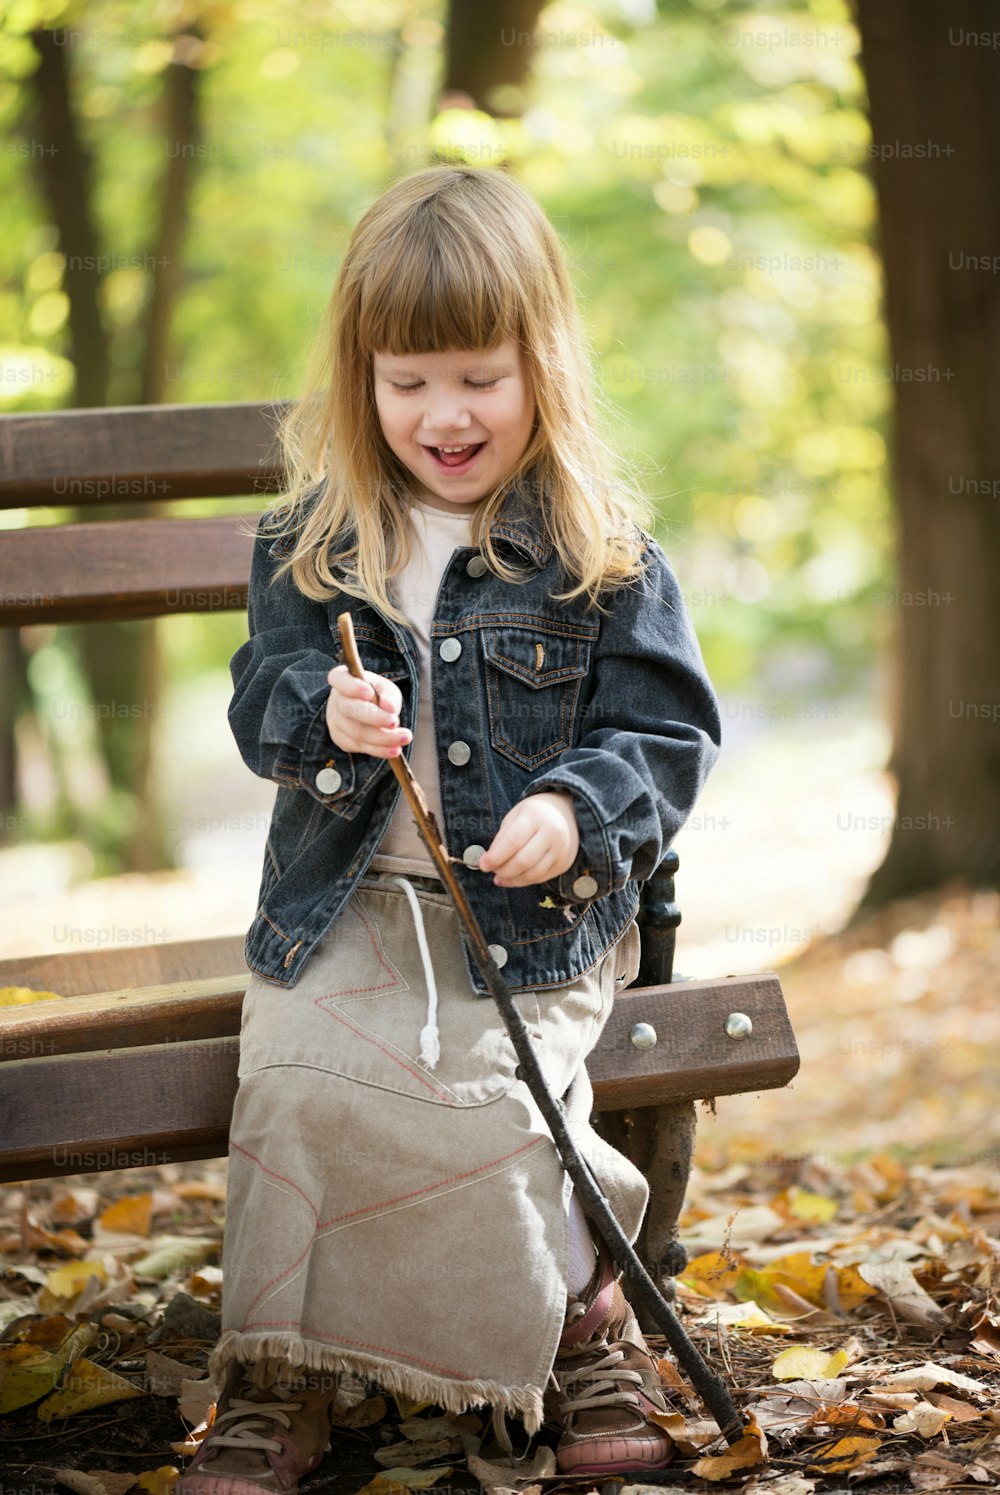 Beautiful little girl sitting alone on park bench and holding wooden stick. Looking down and smiling. Outdoor autumn portrait.